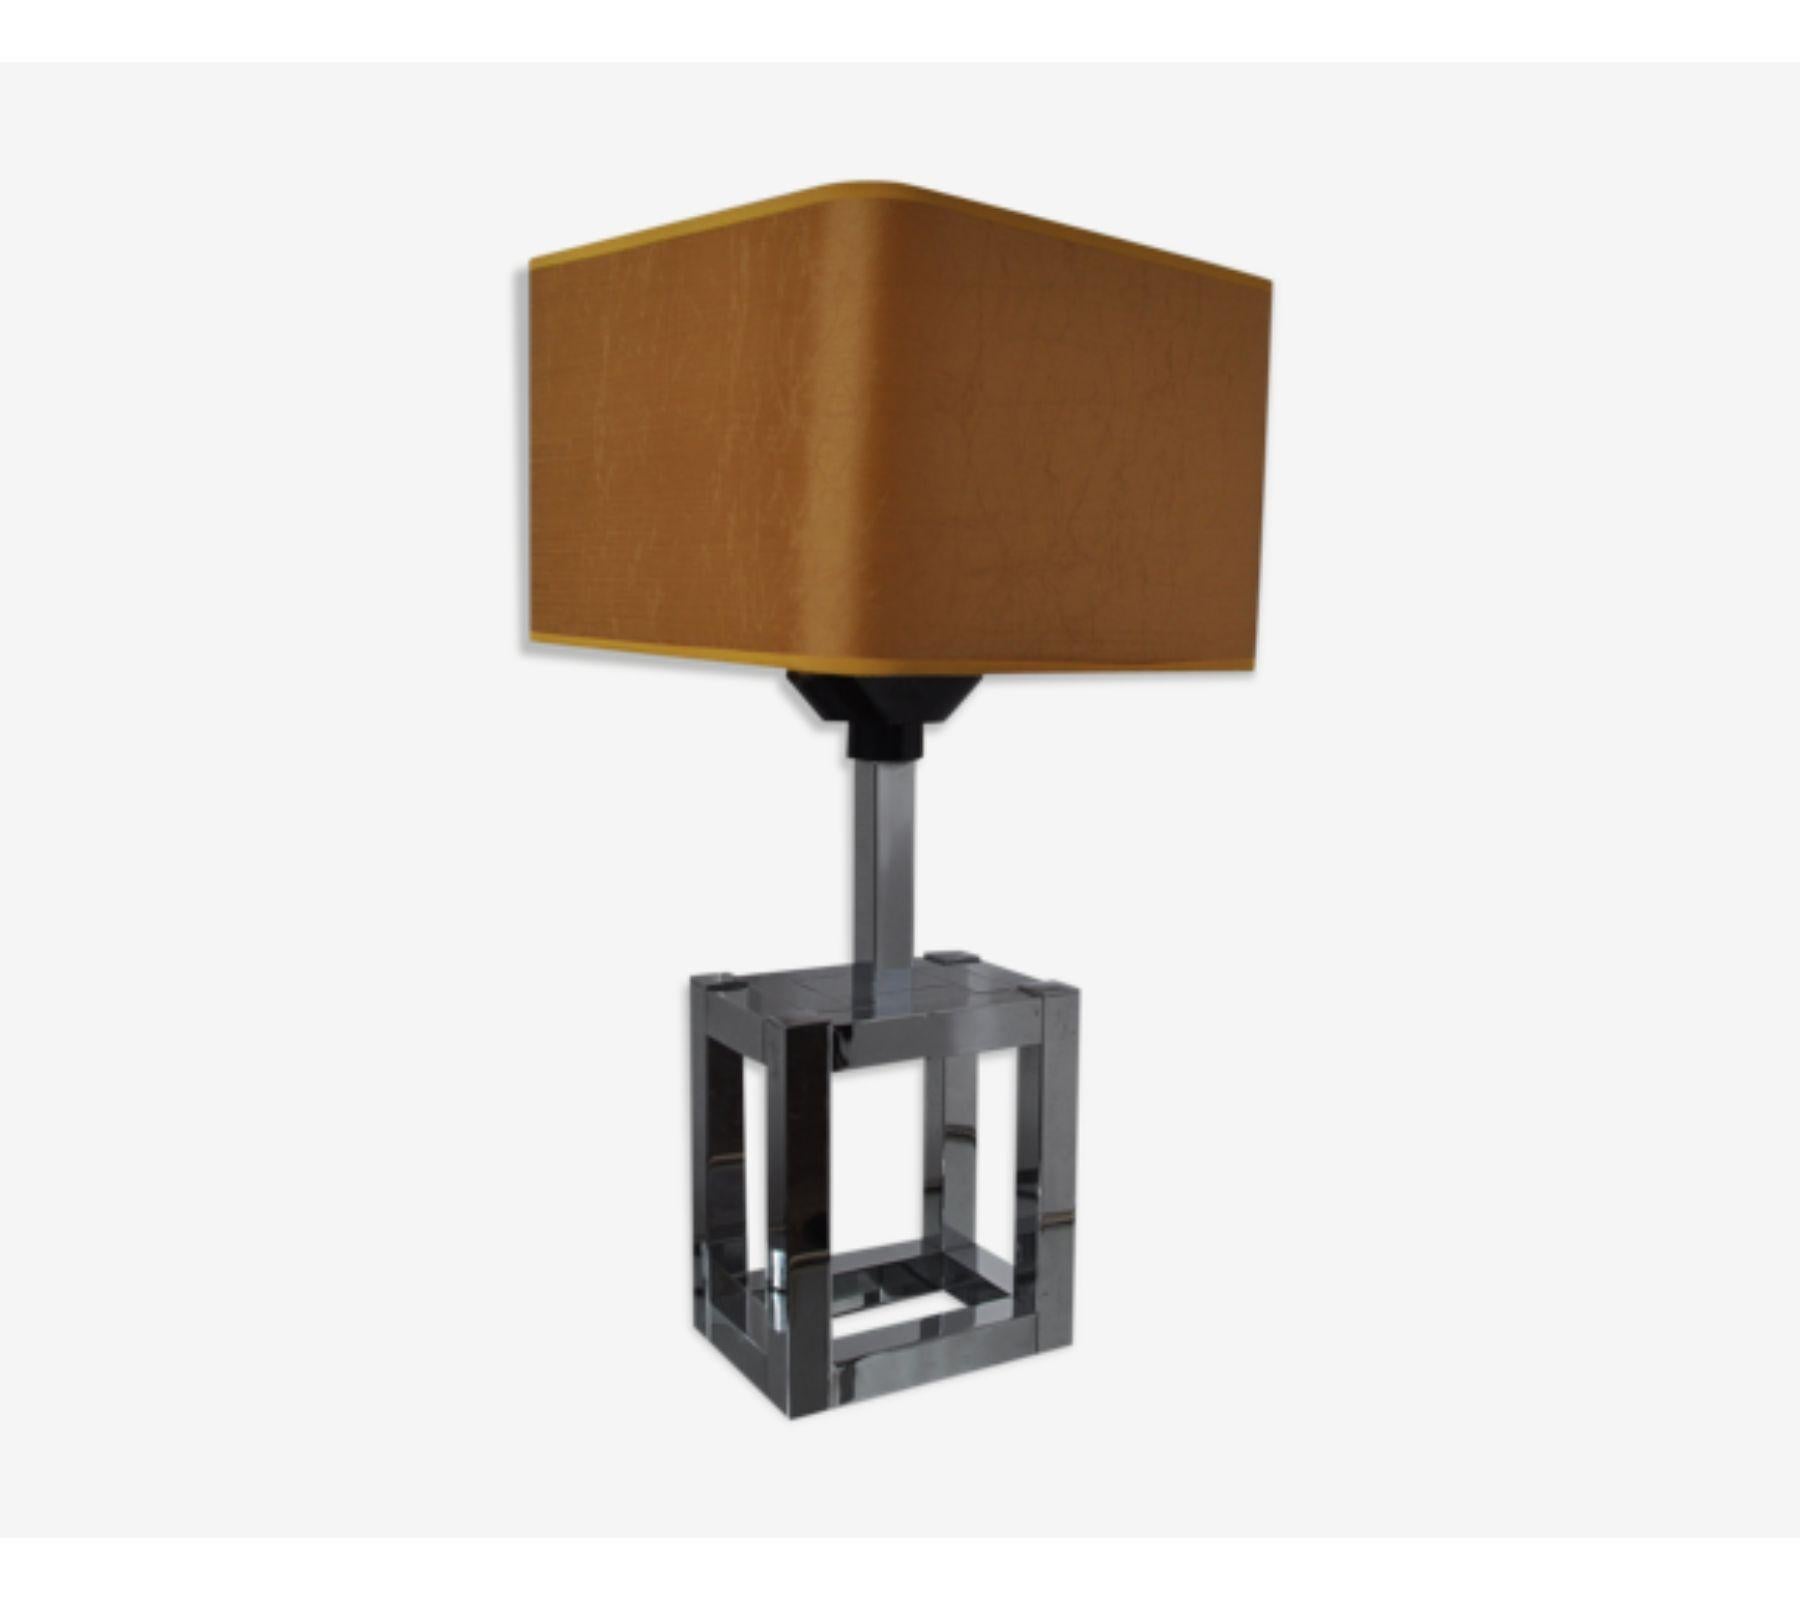 1970 Willy Rizzo Cubic Table Lamp for Lumica, Italy For Sale 2